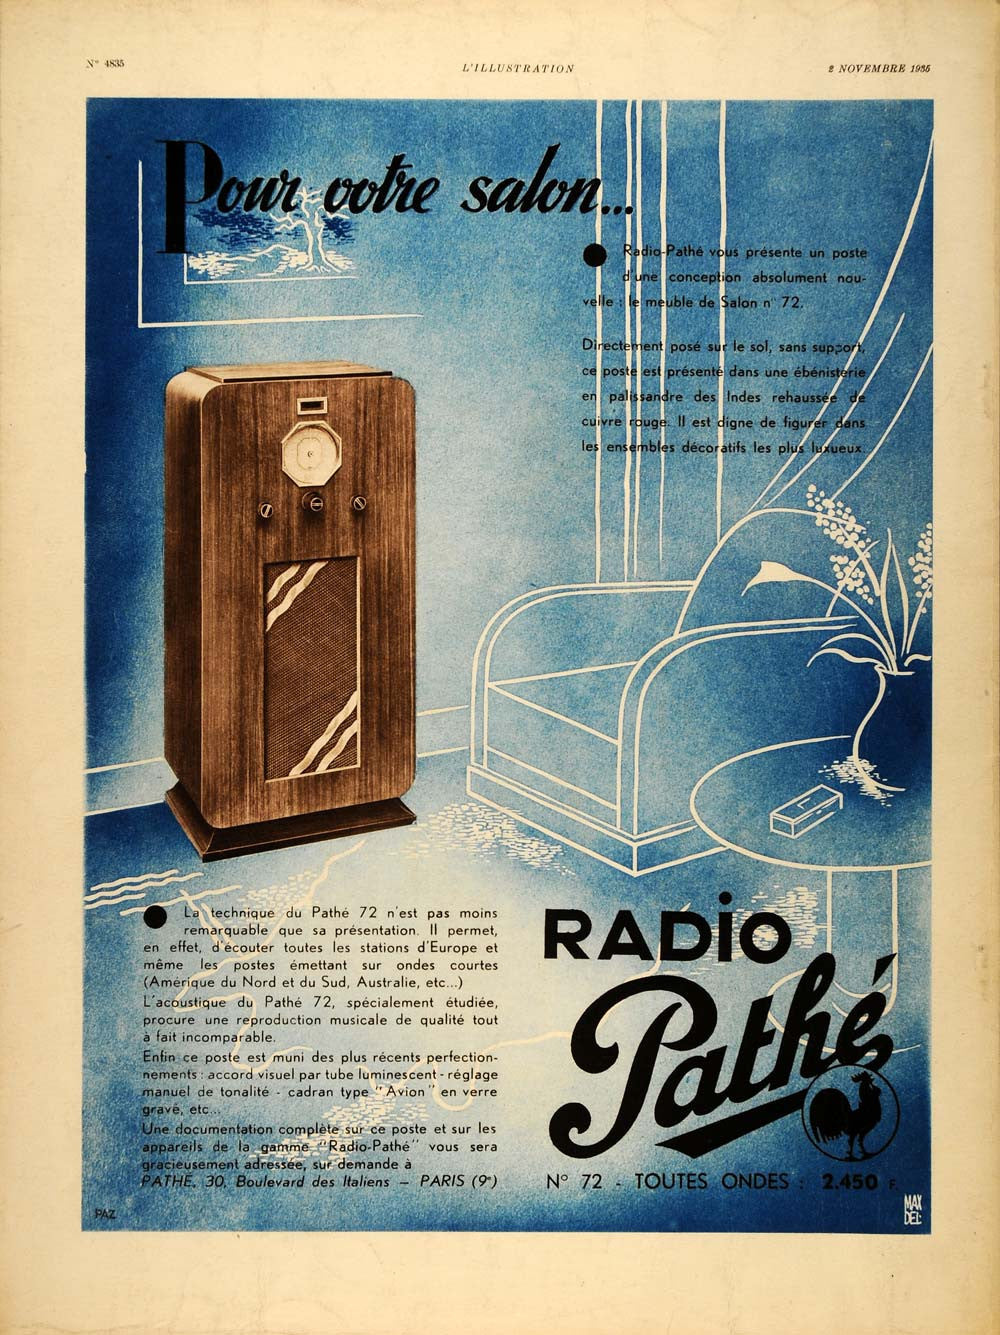 1935 French Ad Radio Pathe No. 72 Cabinet Lithograph - ORIGINAL ADVERTISING ILL1 - Period Paper
